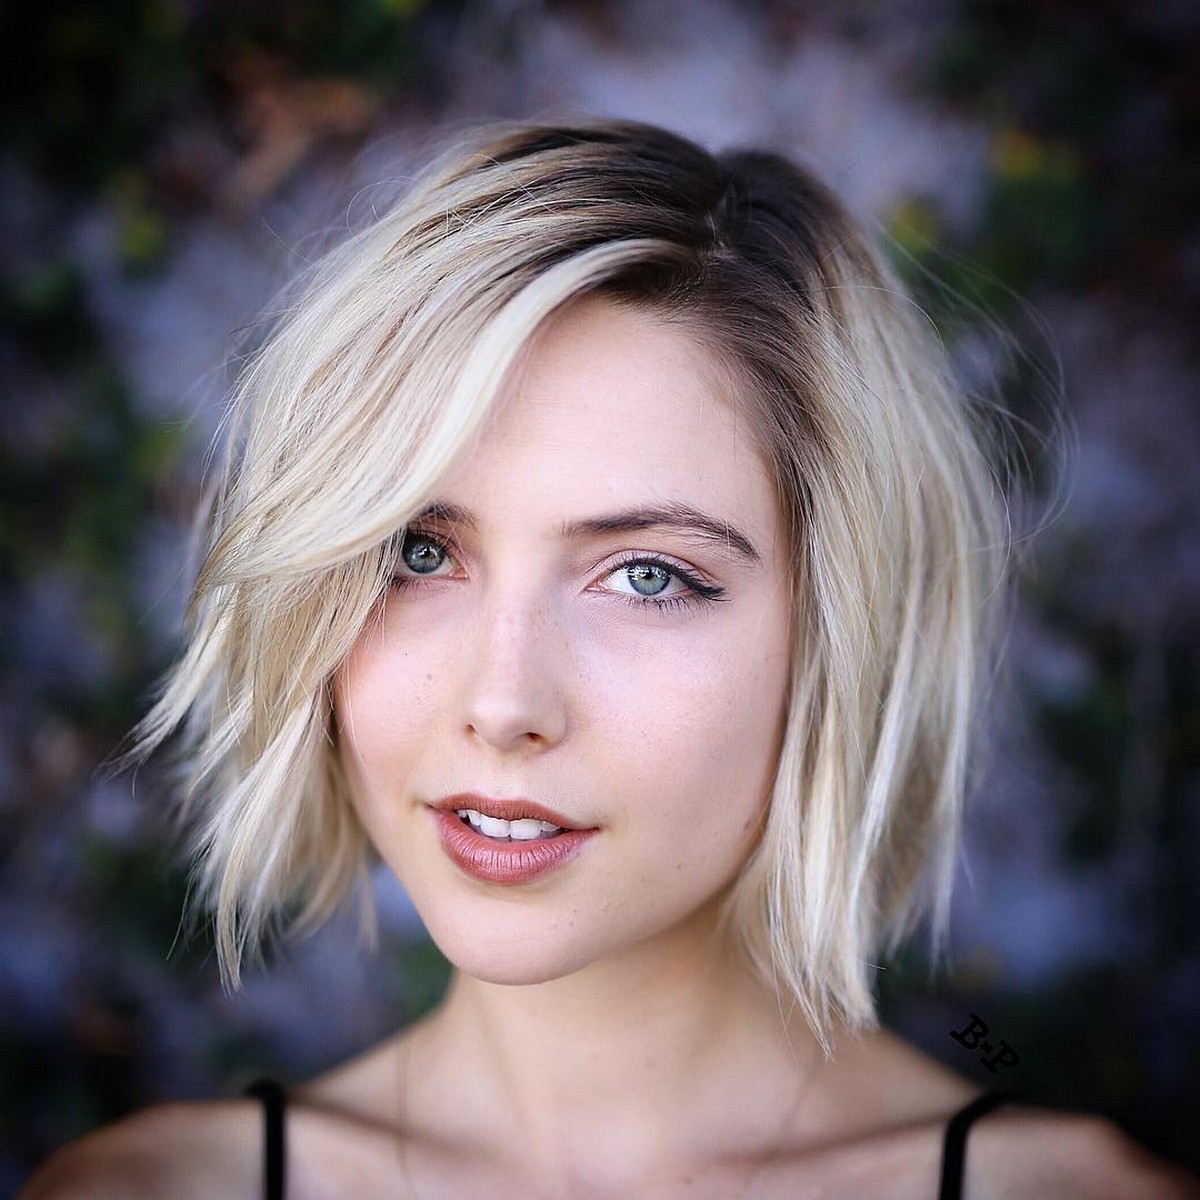 Shaggy Blonde Bob With Root Fade